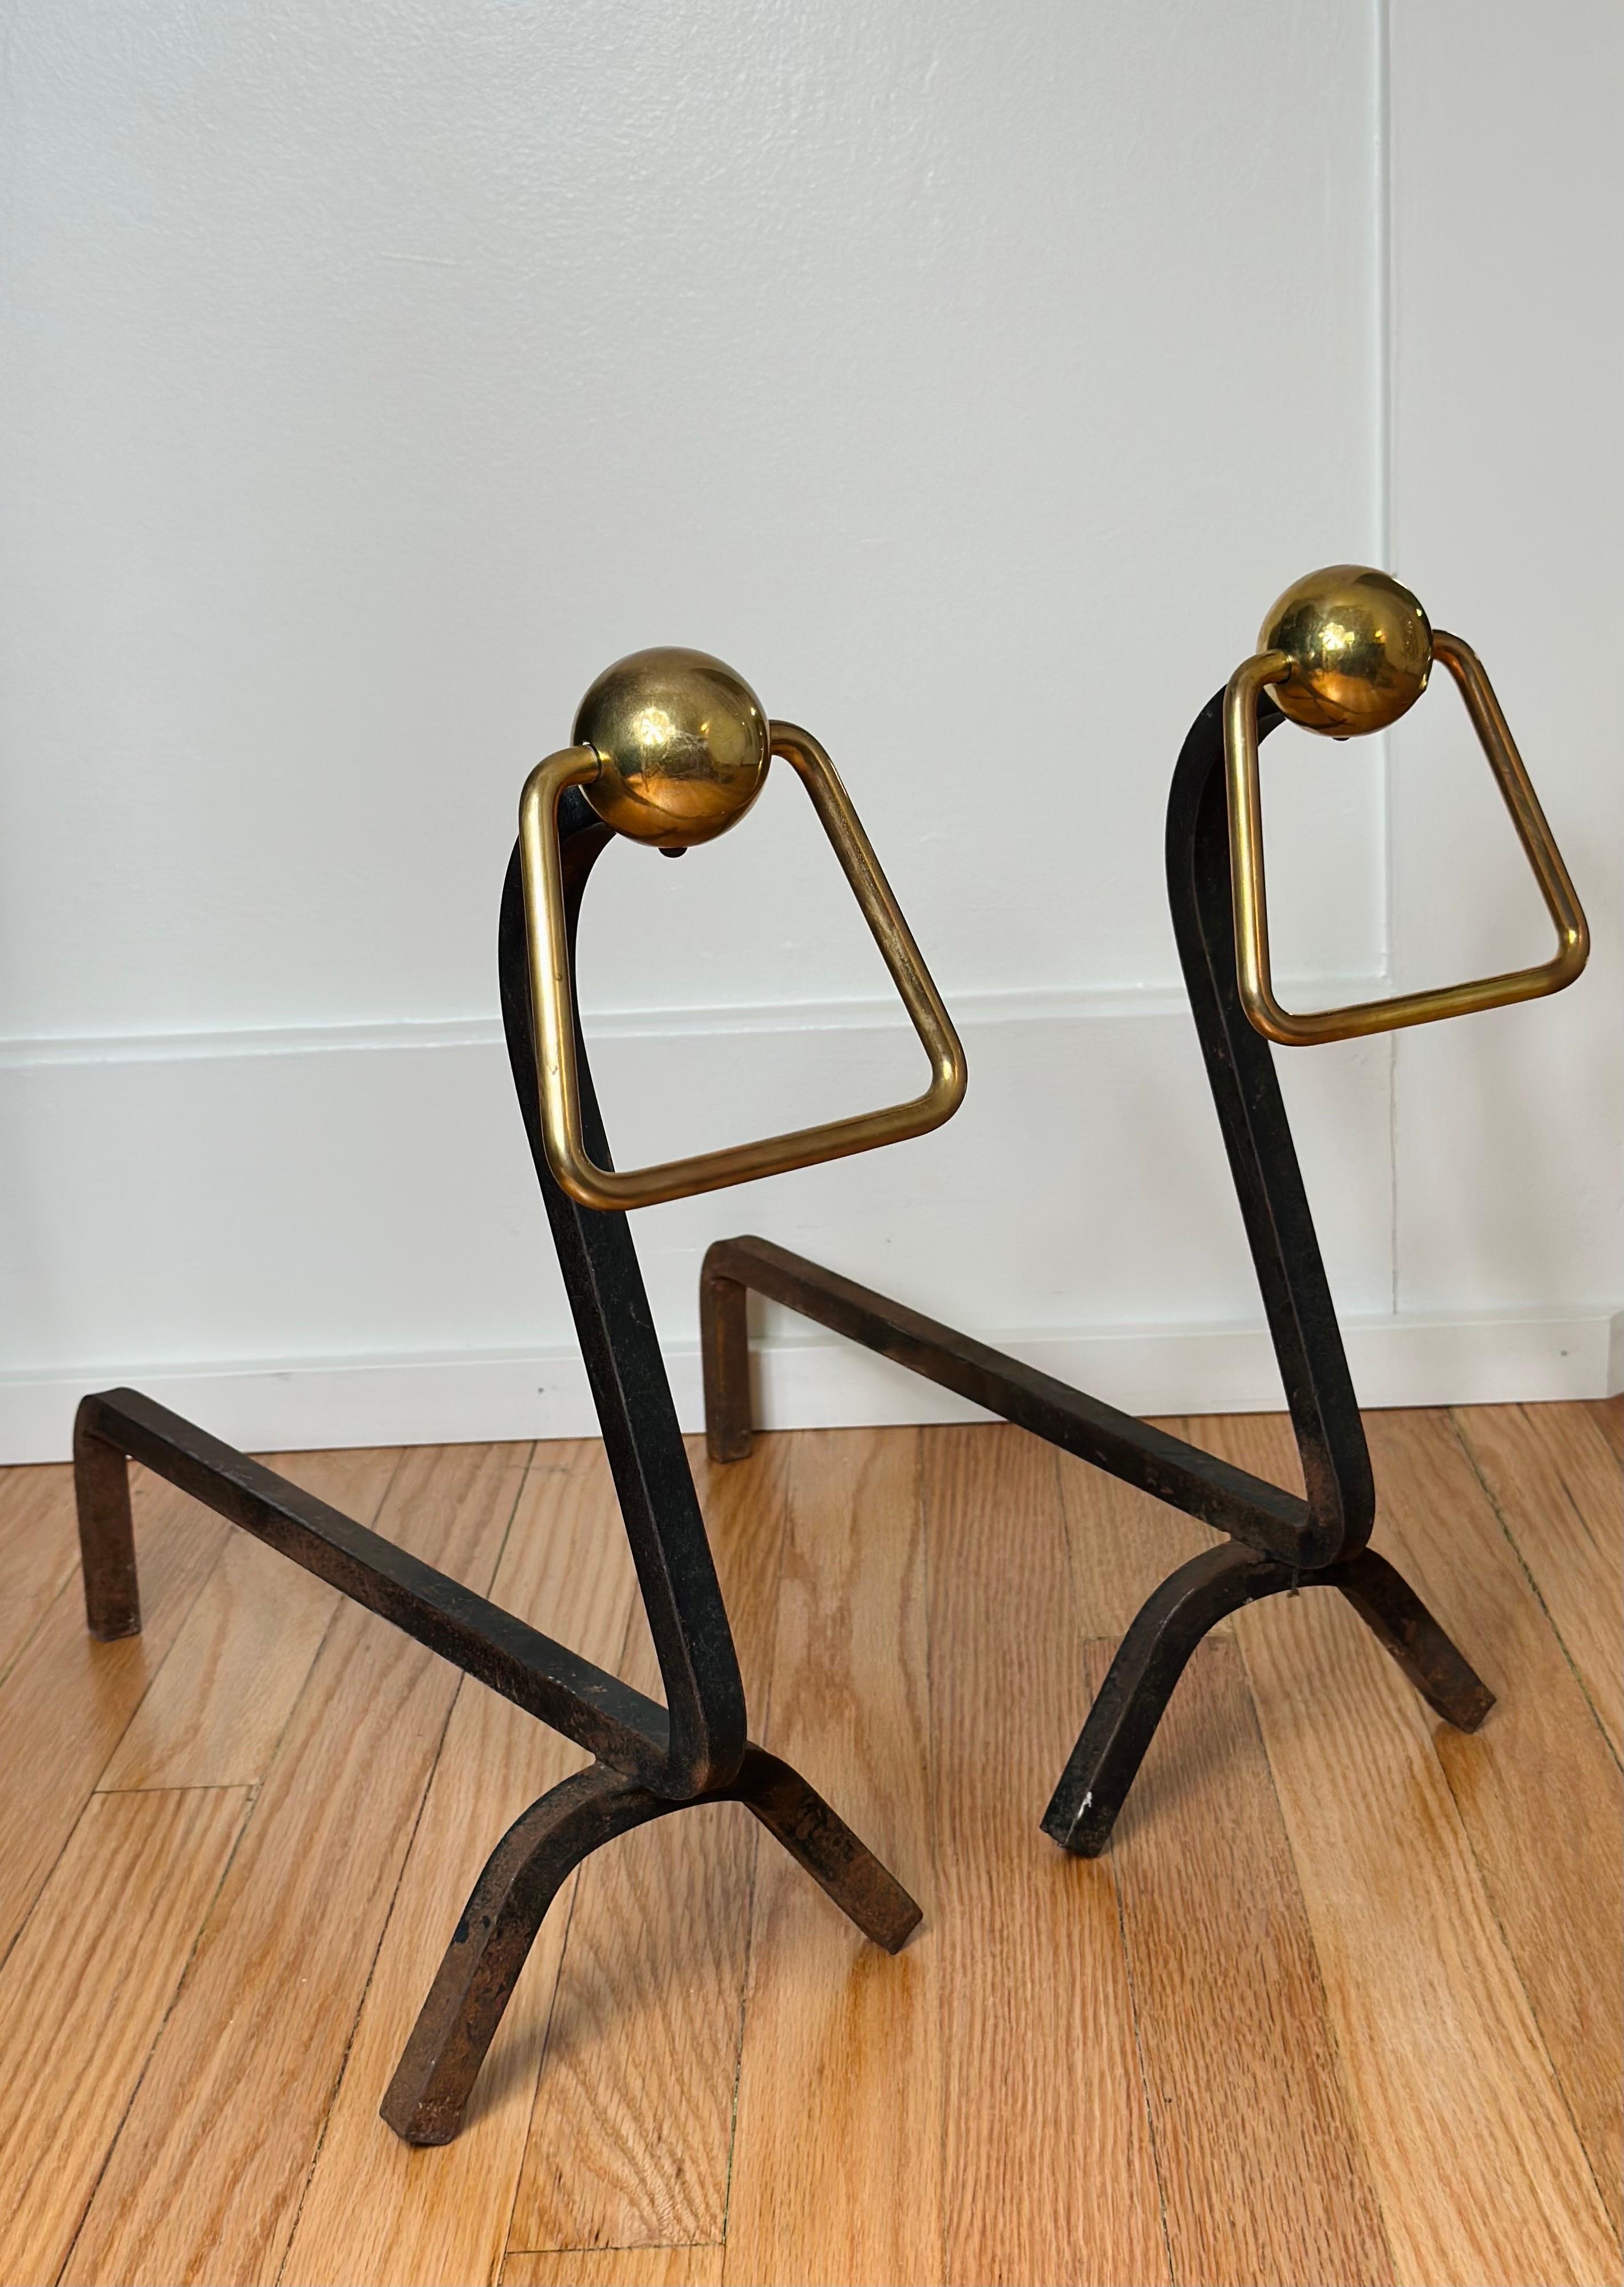 1940s Modernist Jacques Adnet Style Wrought Iron and Brass Andirons - a Pair For Sale 1